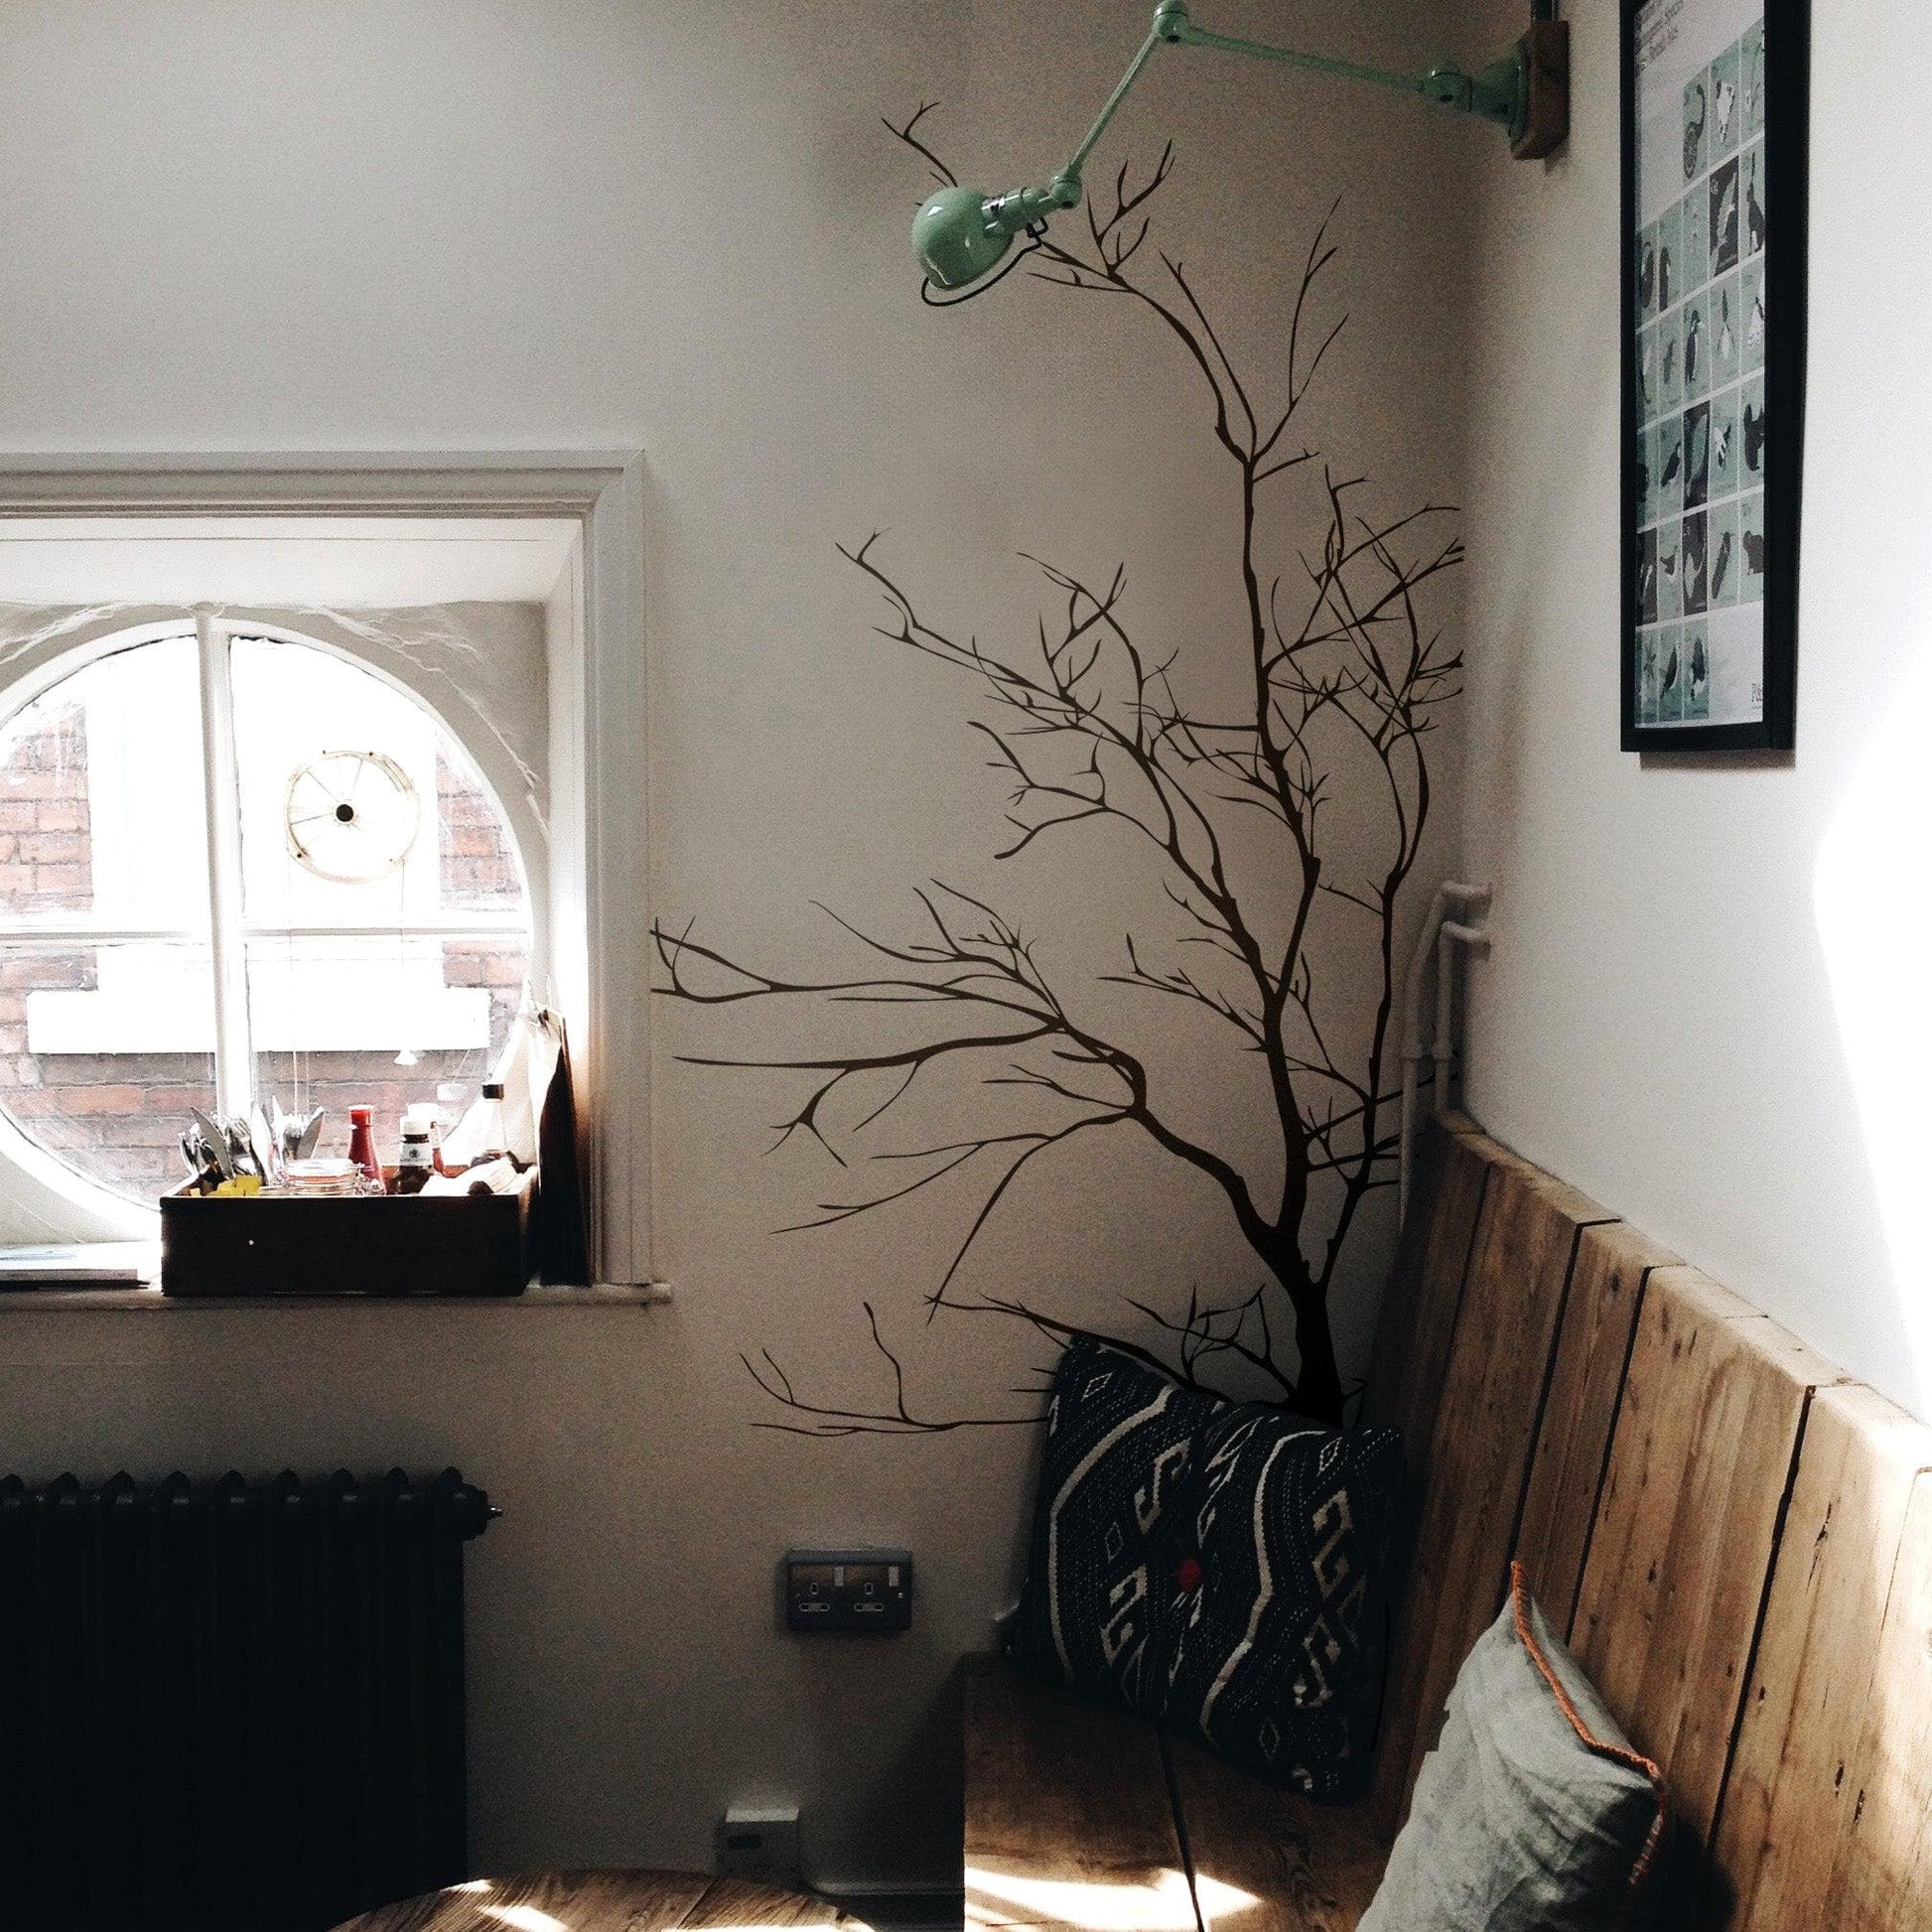 A black tree decal on a white wall near a wooden bench and circular window.